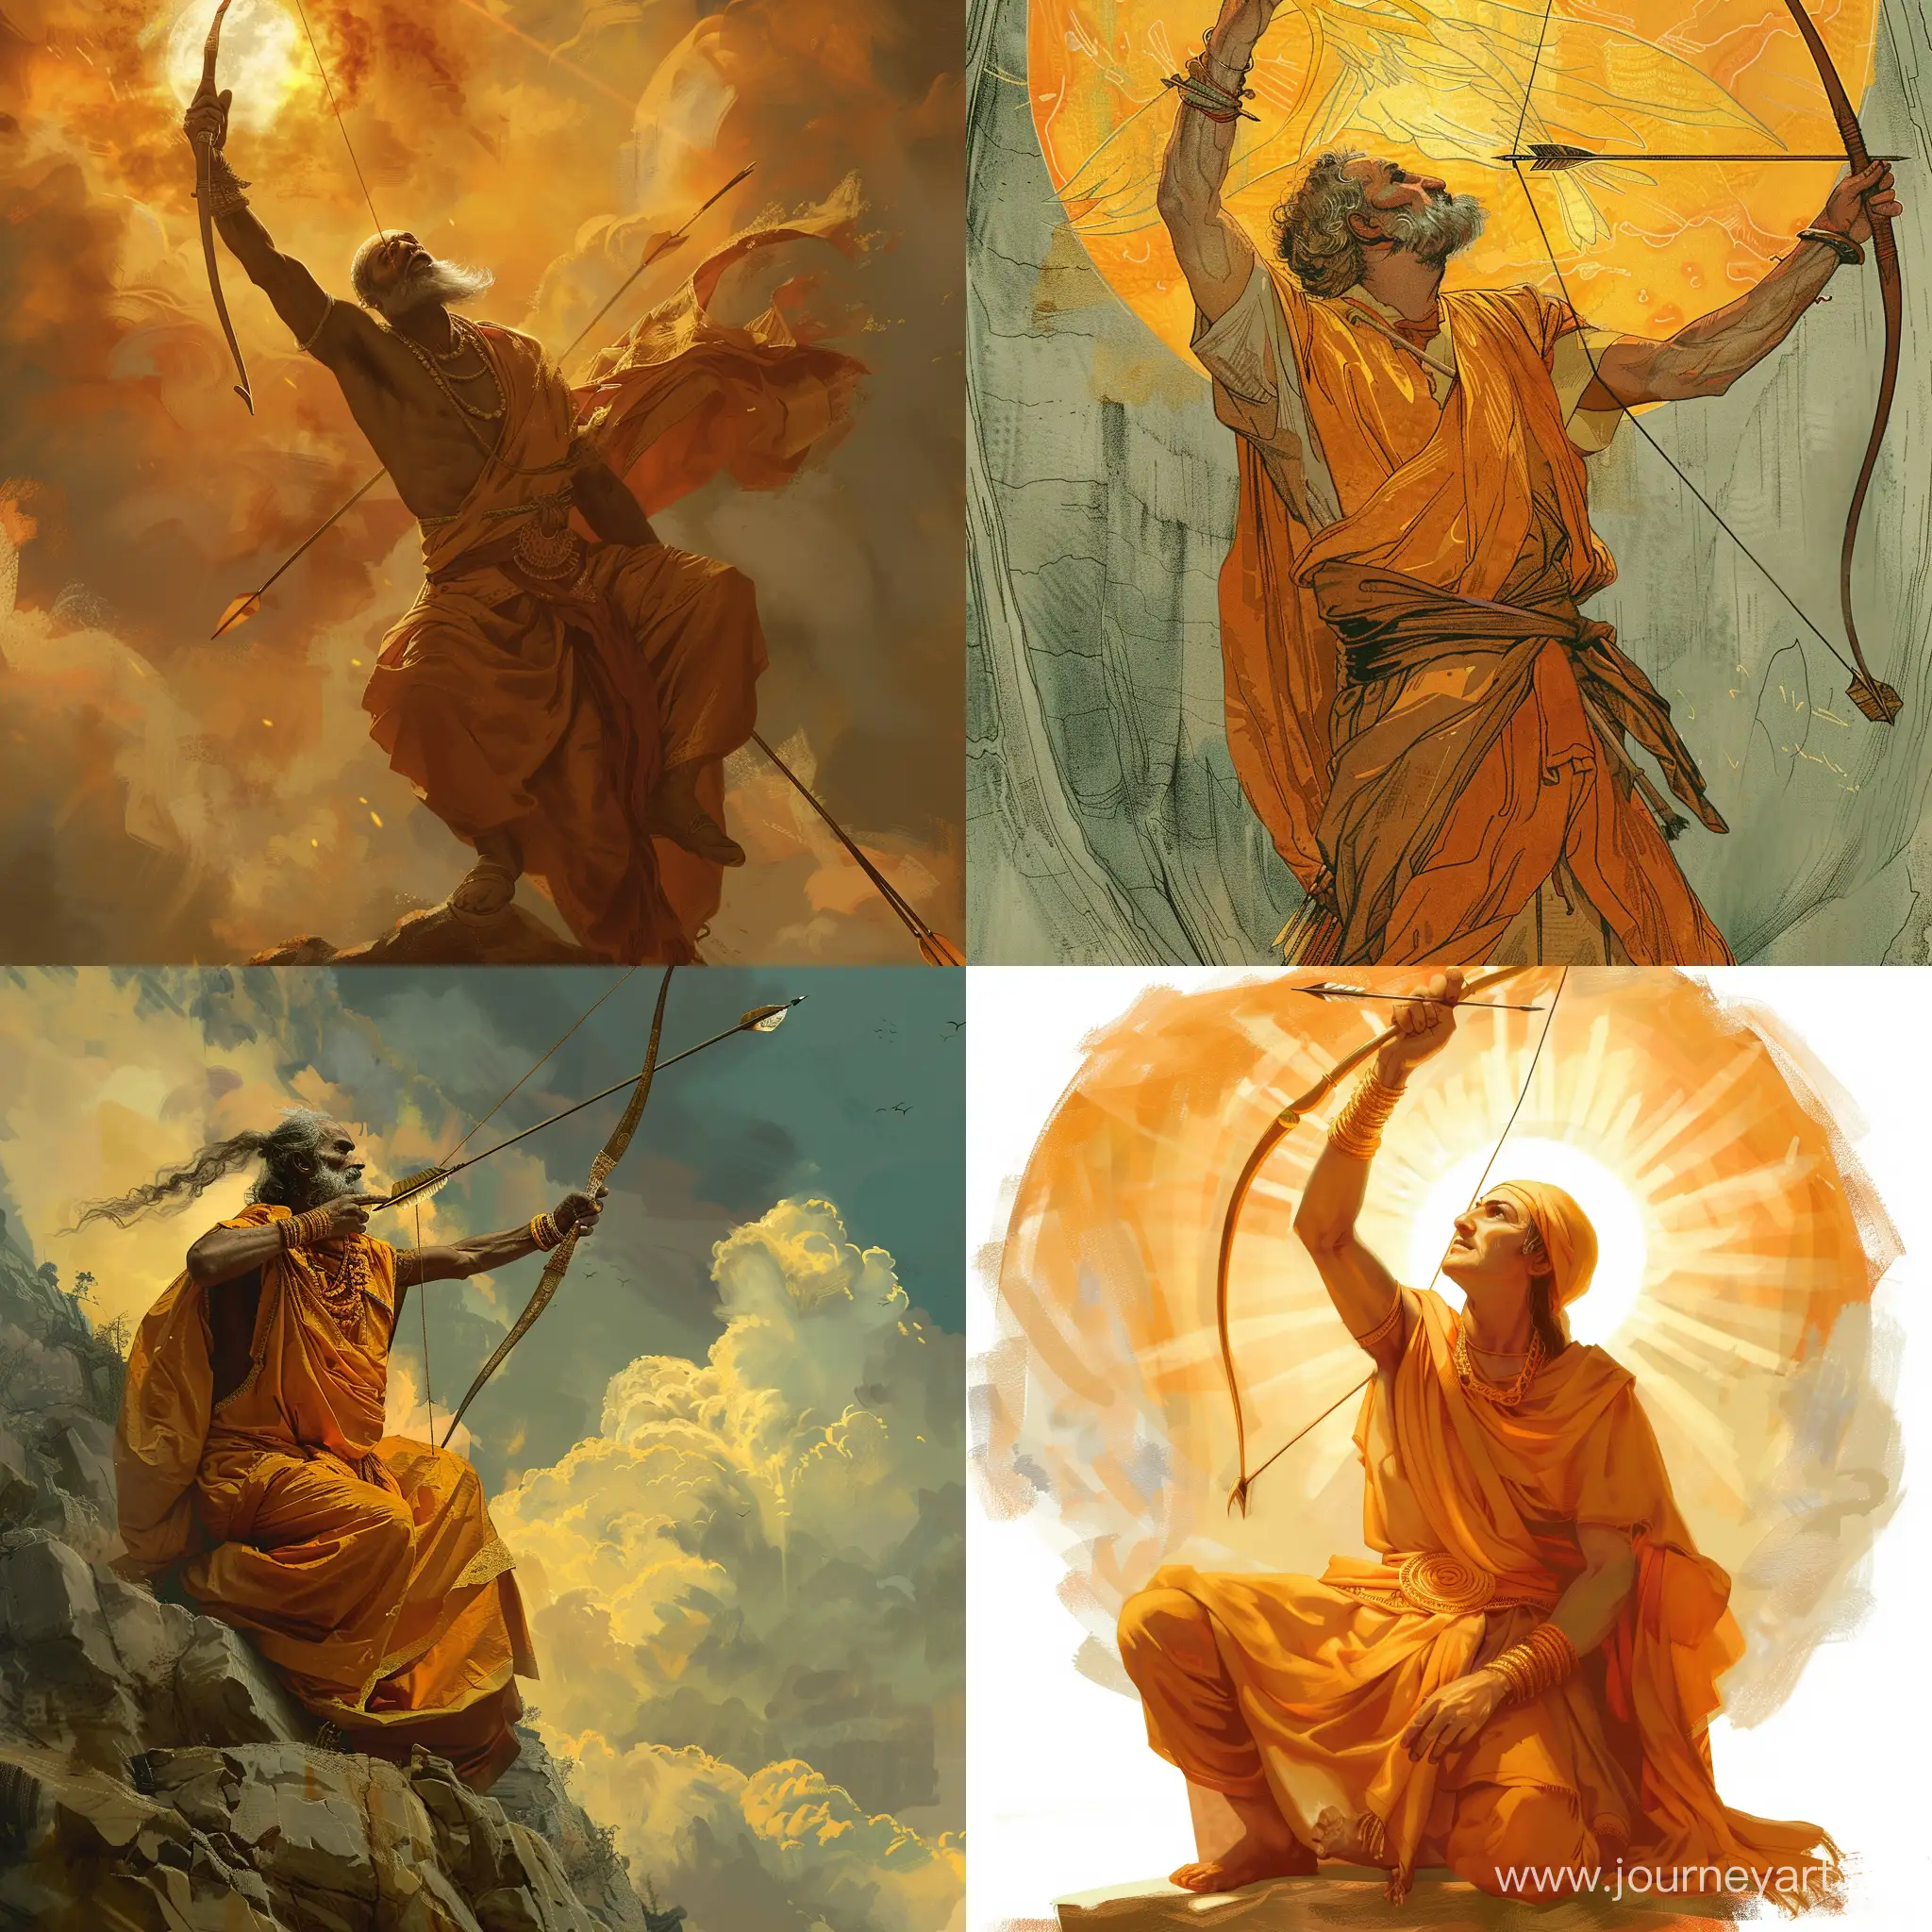 Saint-Wearing-Amber-Clothes-Raising-an-Arrow-to-the-Sky